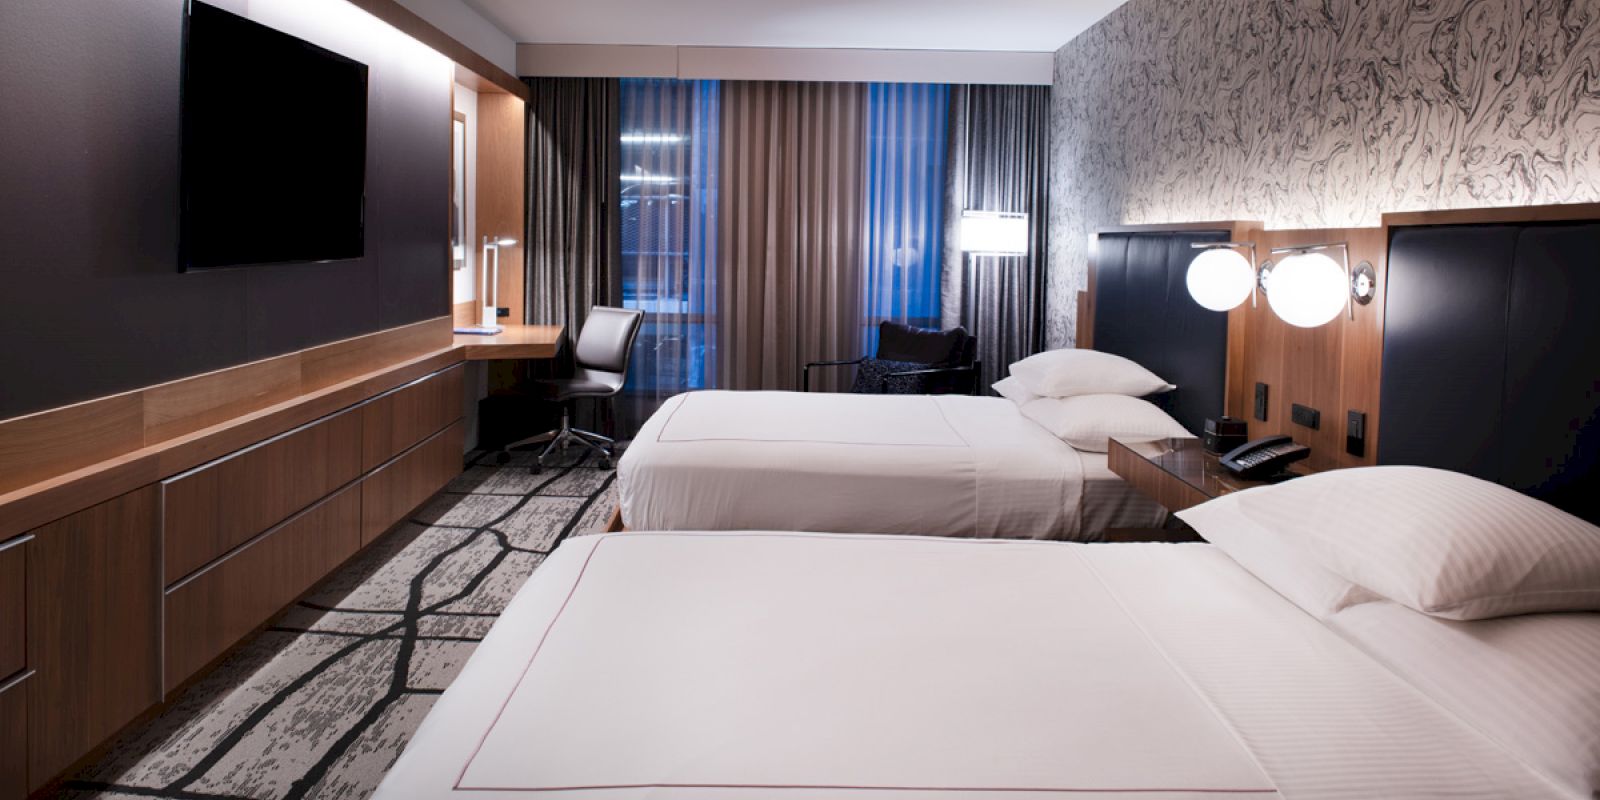 The image shows a modern hotel room with two neatly made beds, a flat-screen TV, a work desk with a chair, and stylish decor ending the sentence.